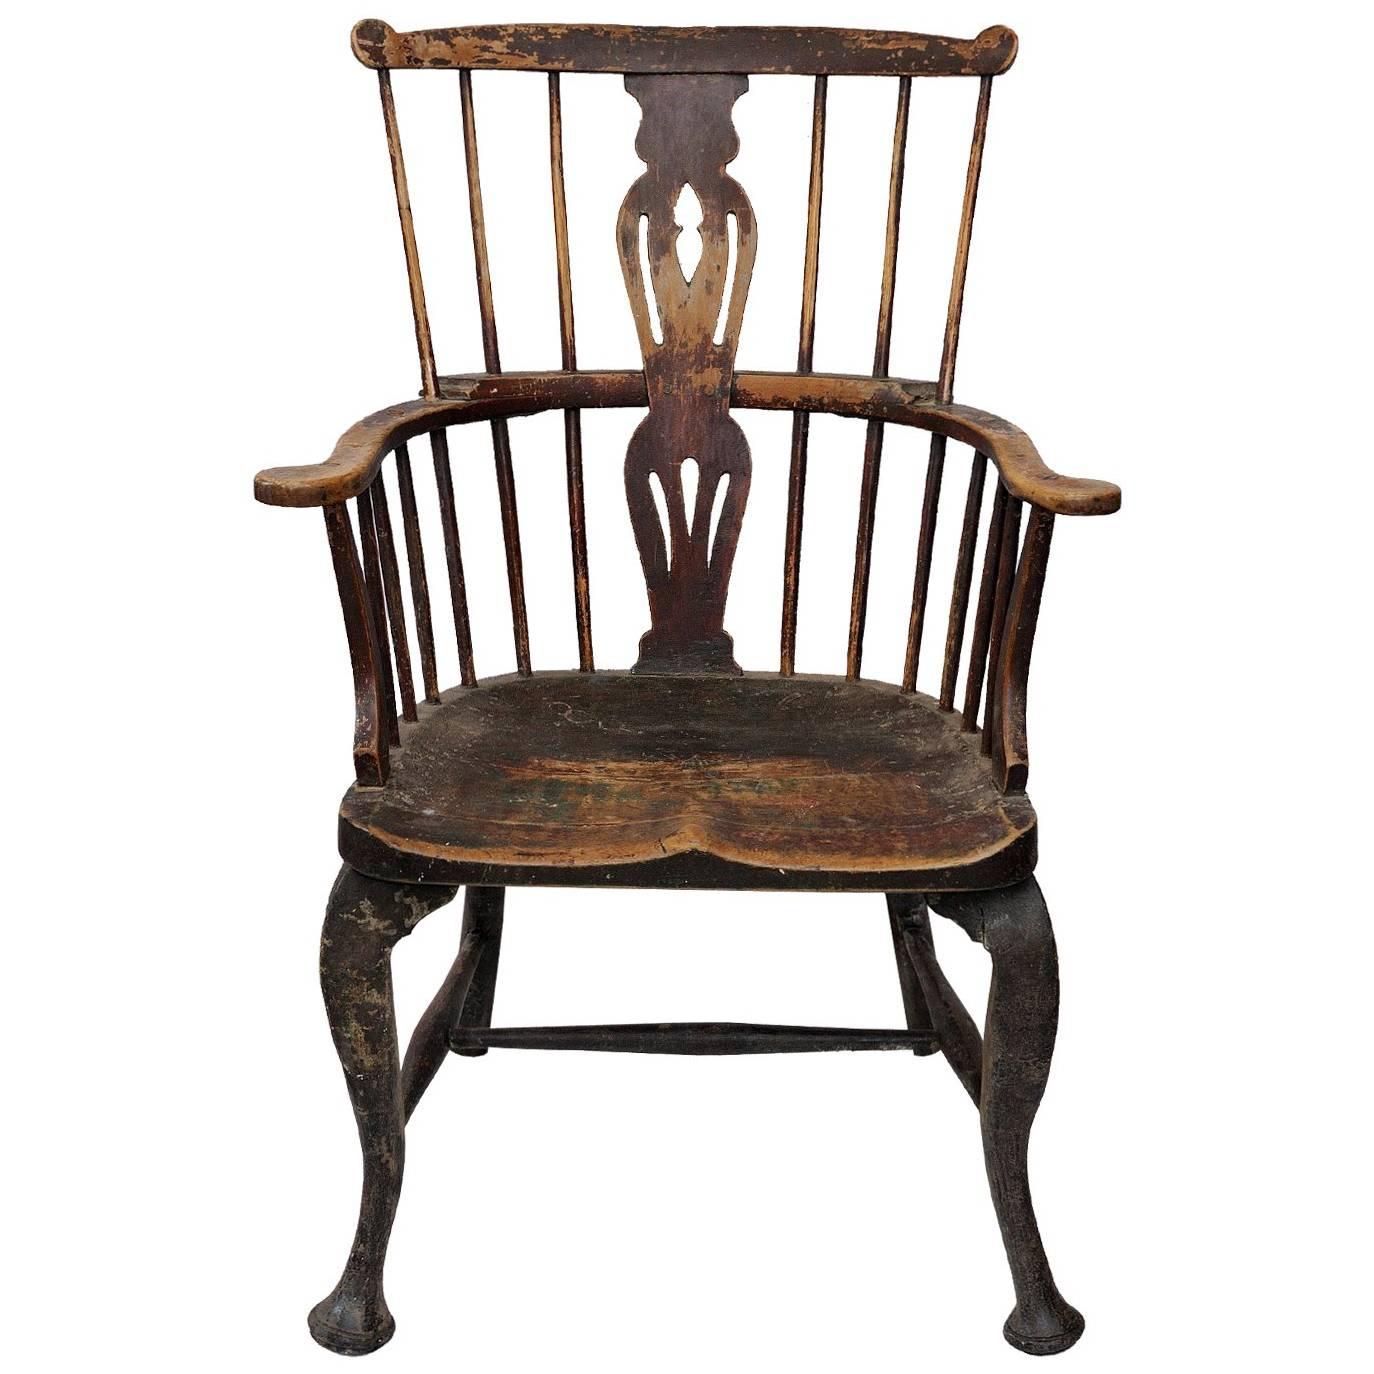 English Mid-18th Century George III 'Thames Valley' Windsor Chair, circa 1760 For Sale